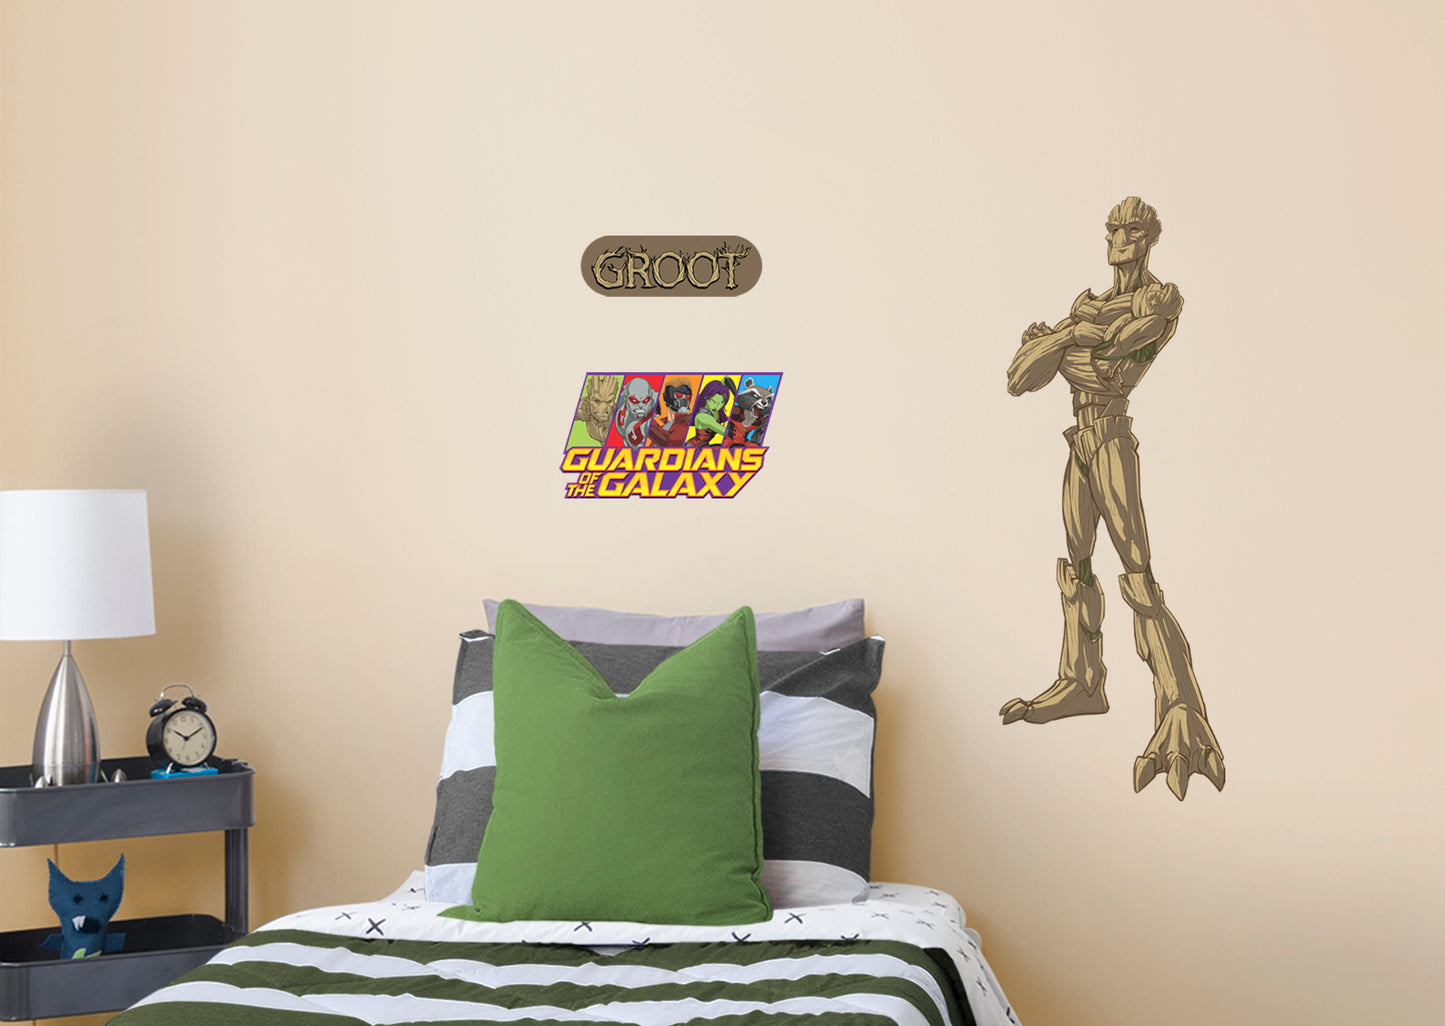 Guardians of the Galaxy Groot RealBig        - Officially Licensed Marvel Removable Wall   Adhesive Decal